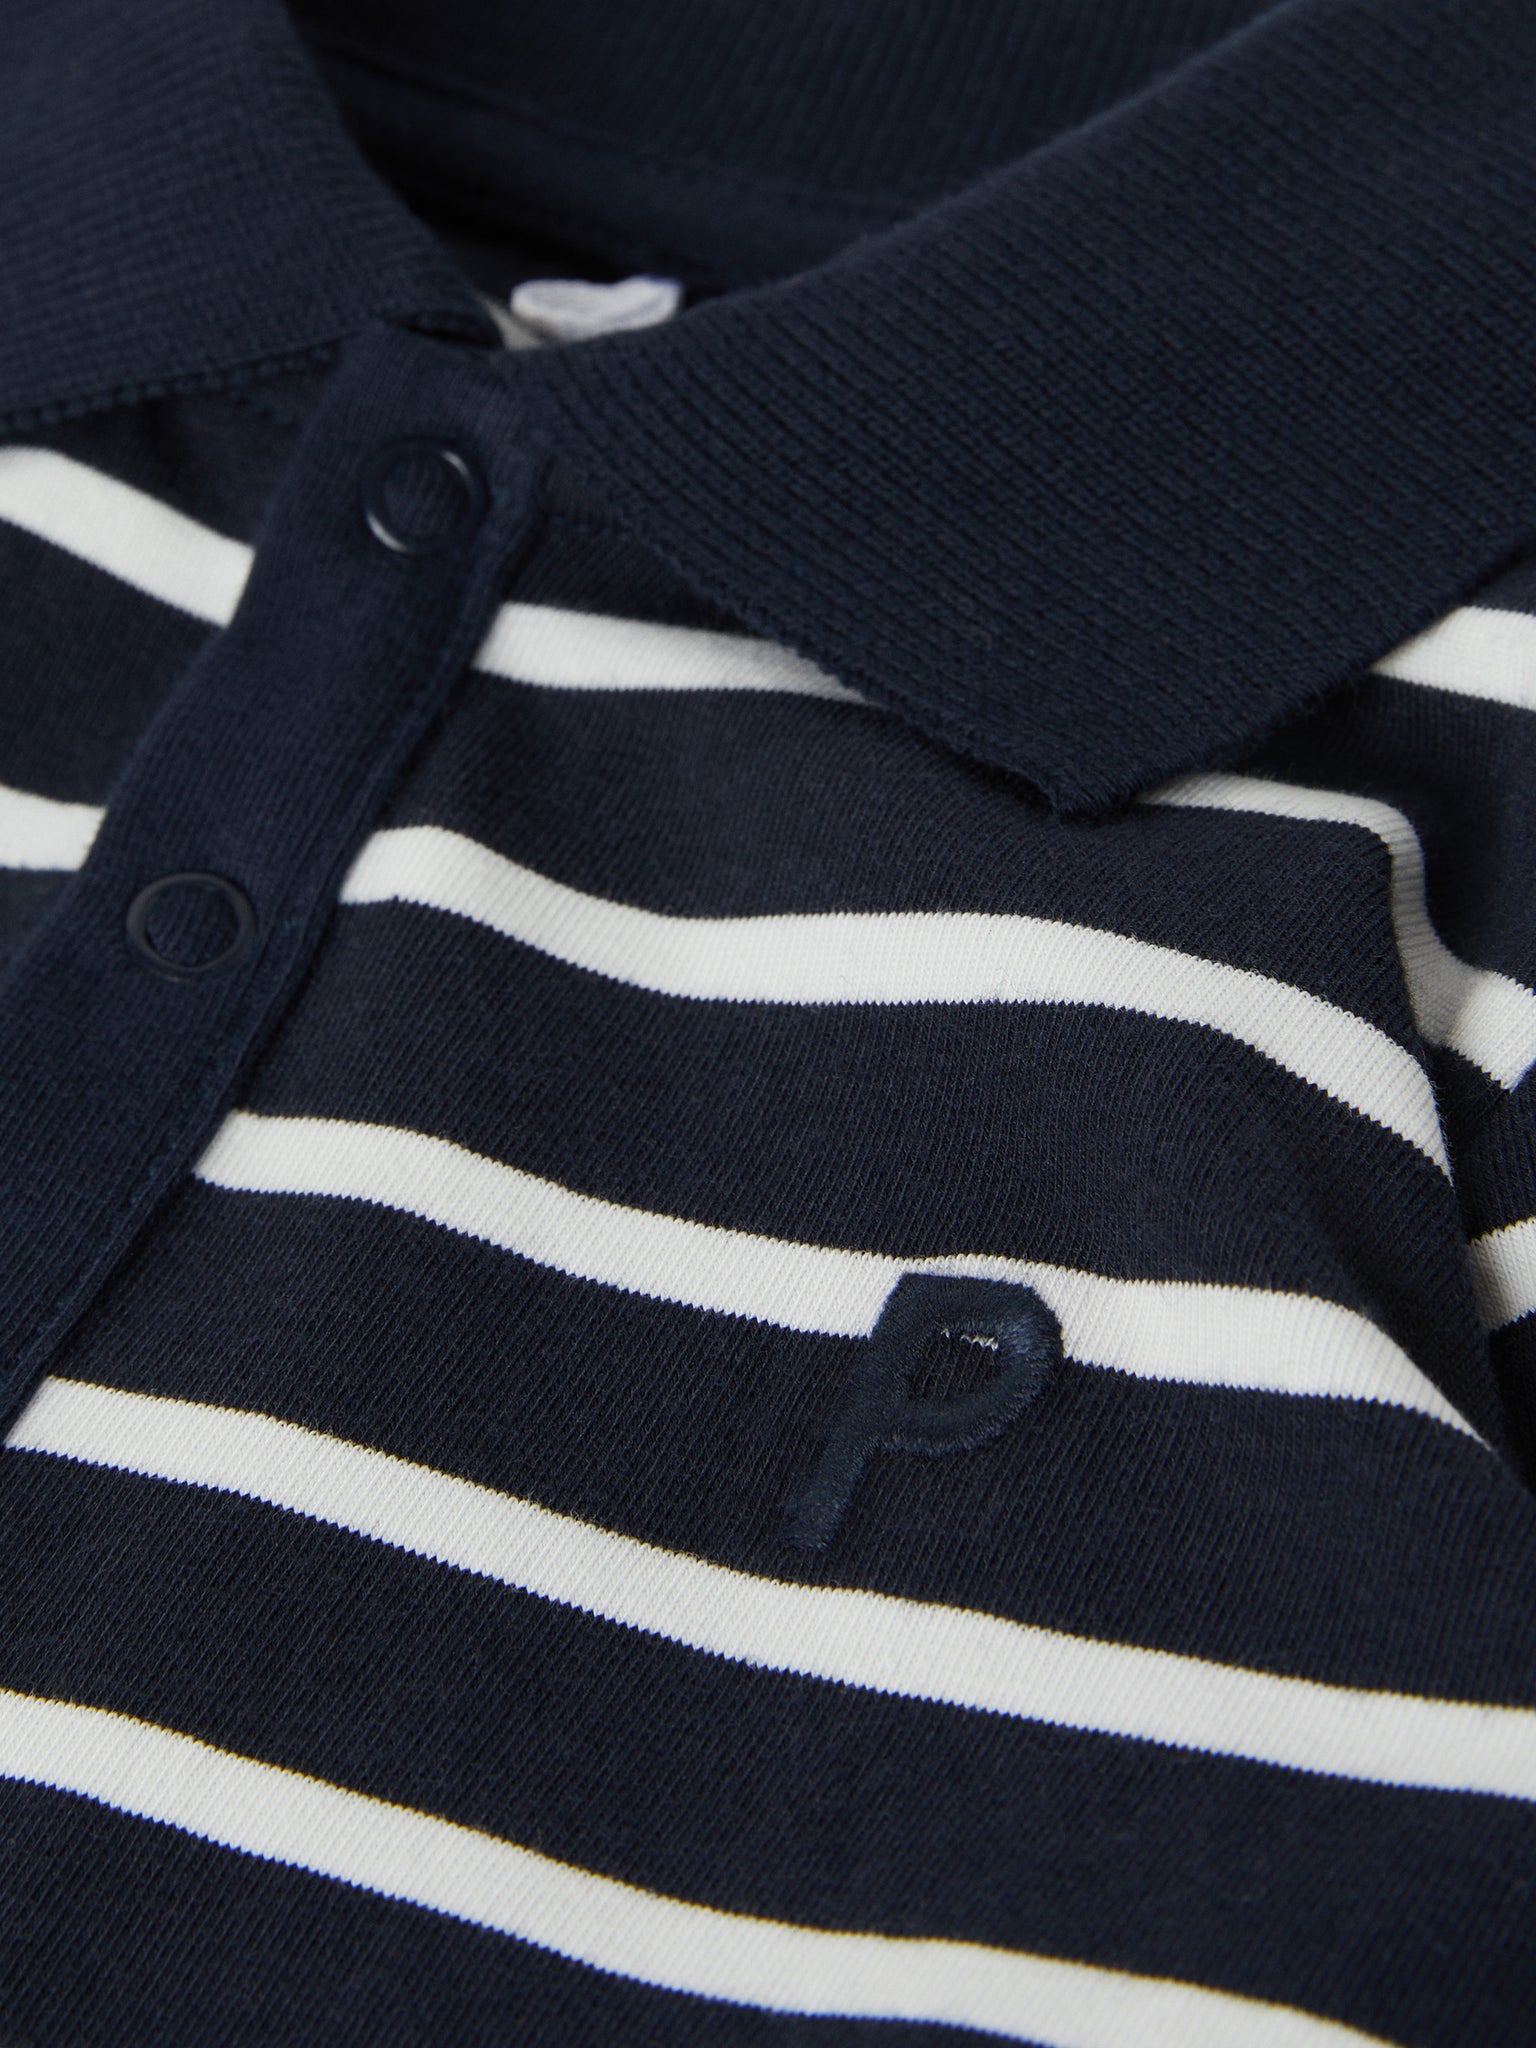 Striped Cotton Polo Shirt Babygrow from the Polarn O. Pyret baby collection. Nordic baby clothes made from sustainable sources.